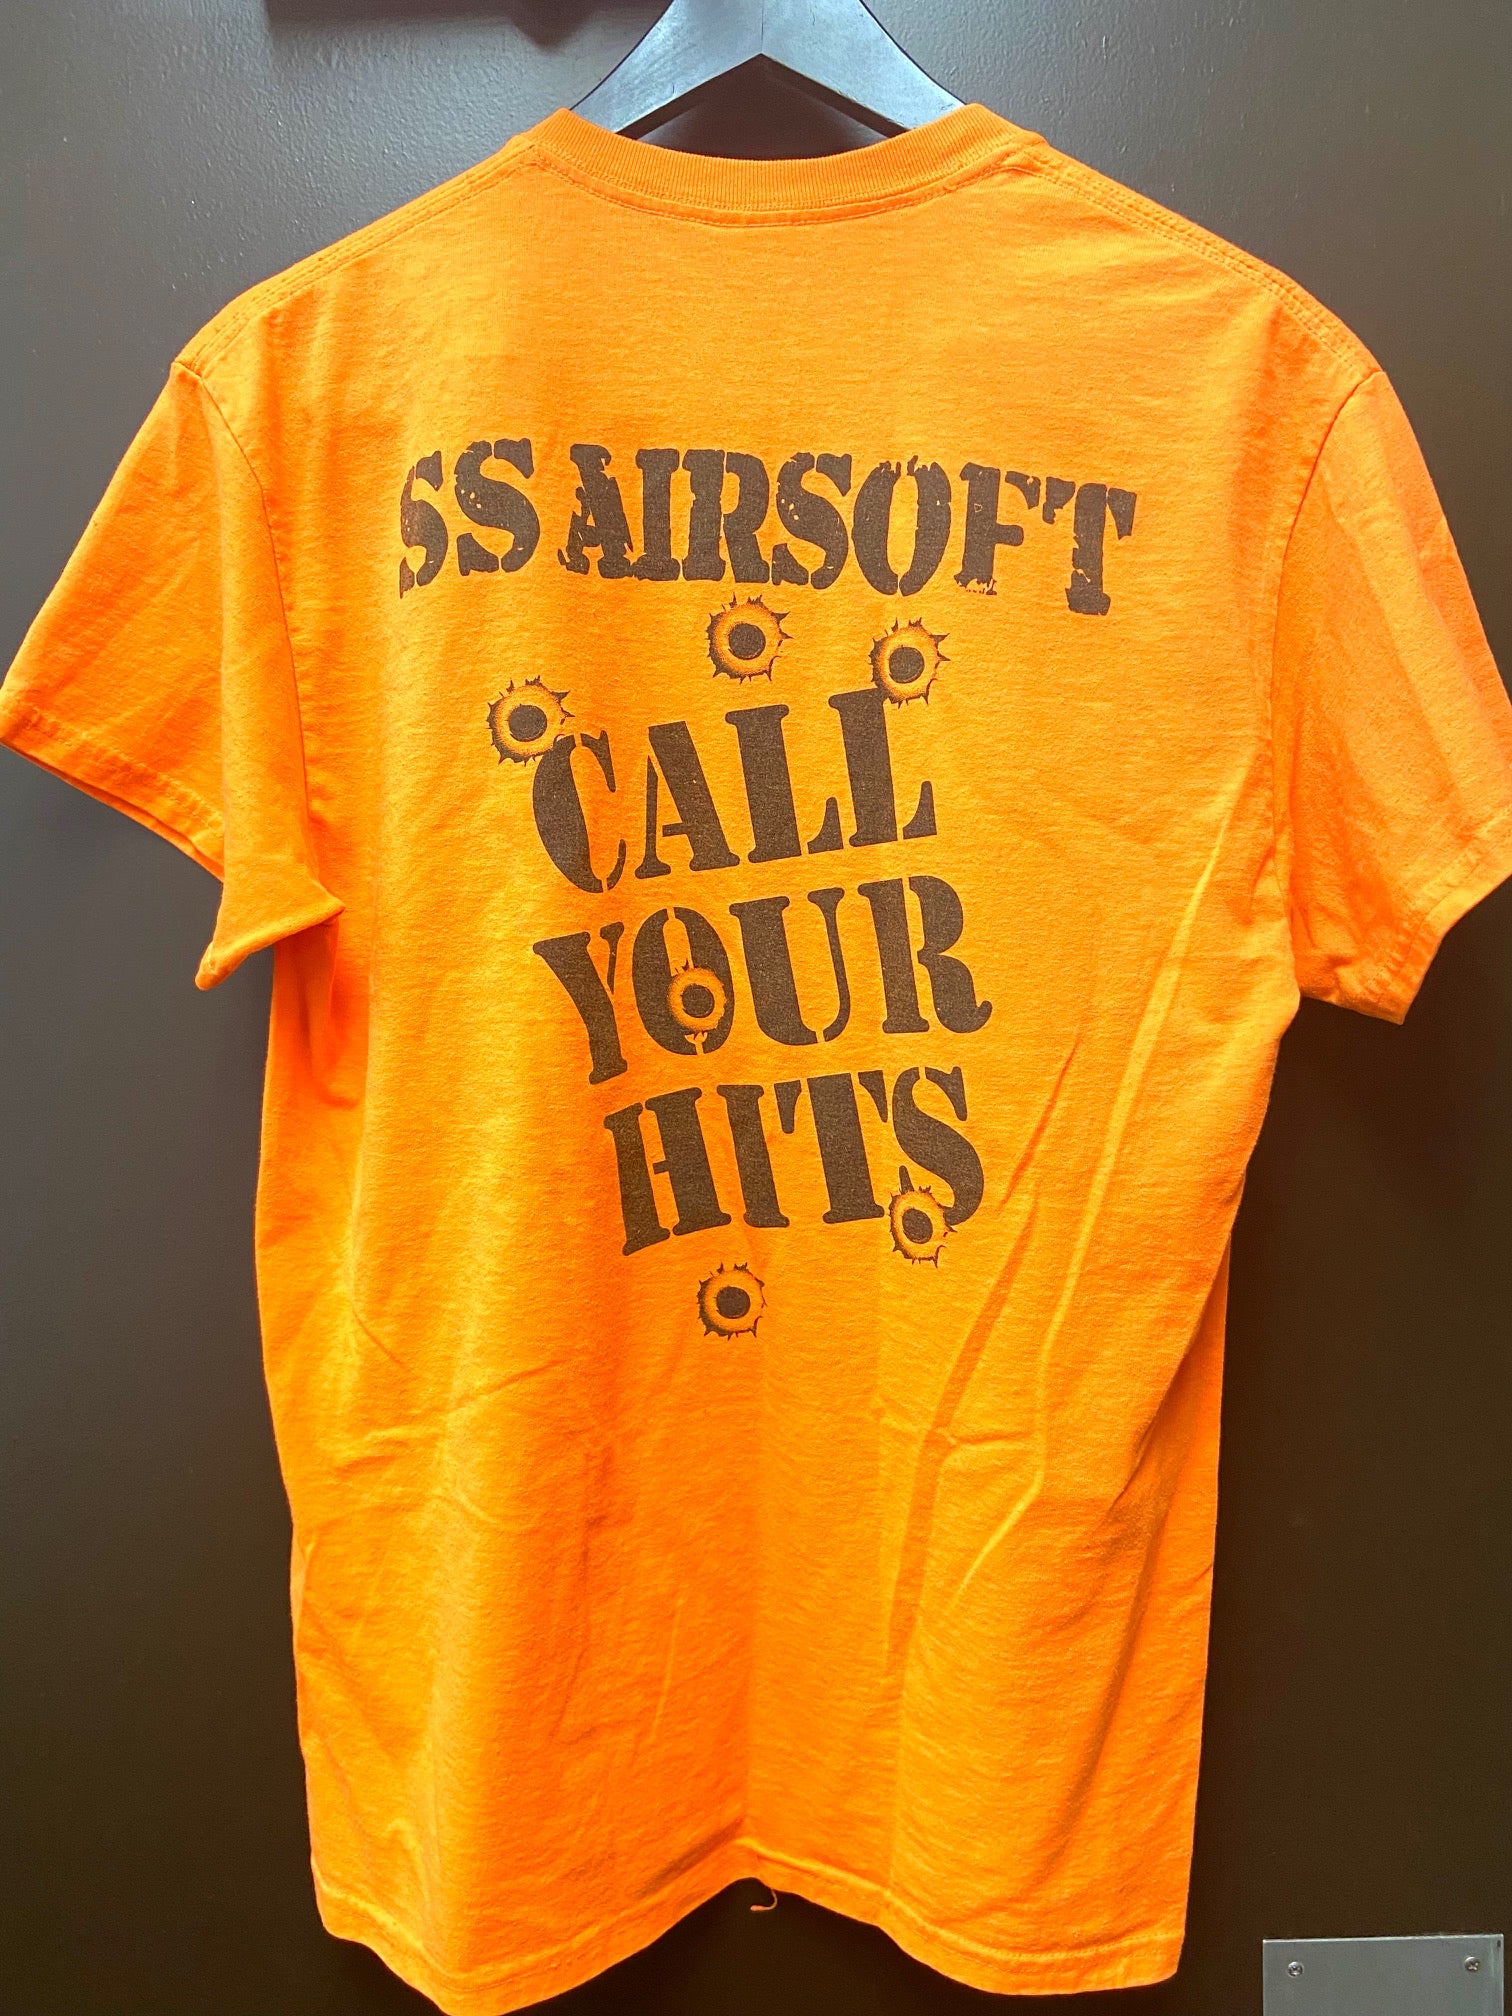 SS Airsoft Call Your Hits T-shirt - ssairsoft